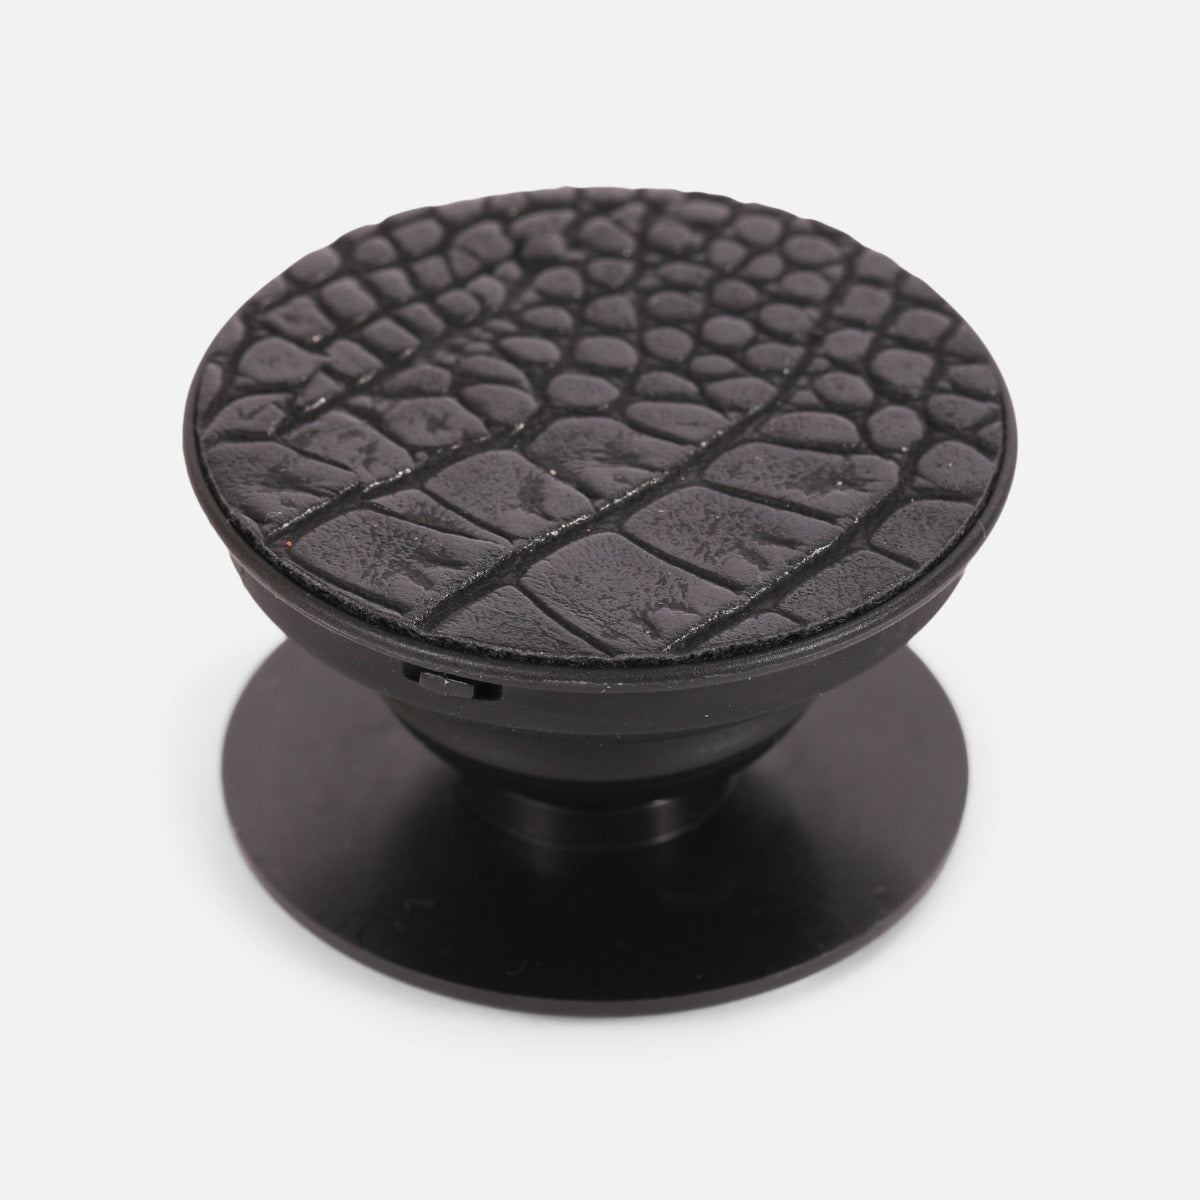 Black snakeskin-printed smartphone stand and grip